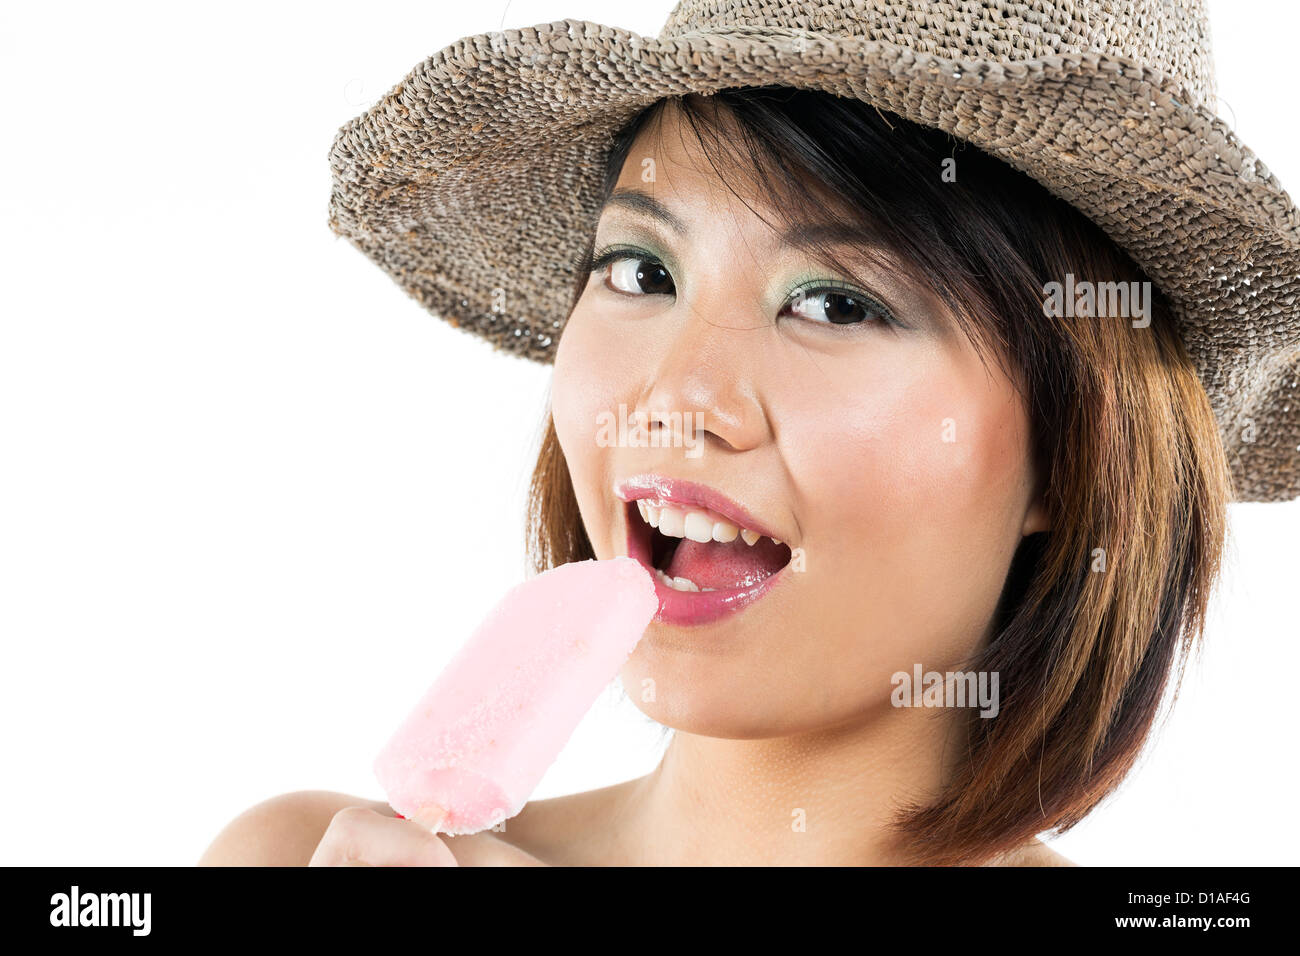 Chinese woman eating an ice lolly. Isolated on white. Stock Photo